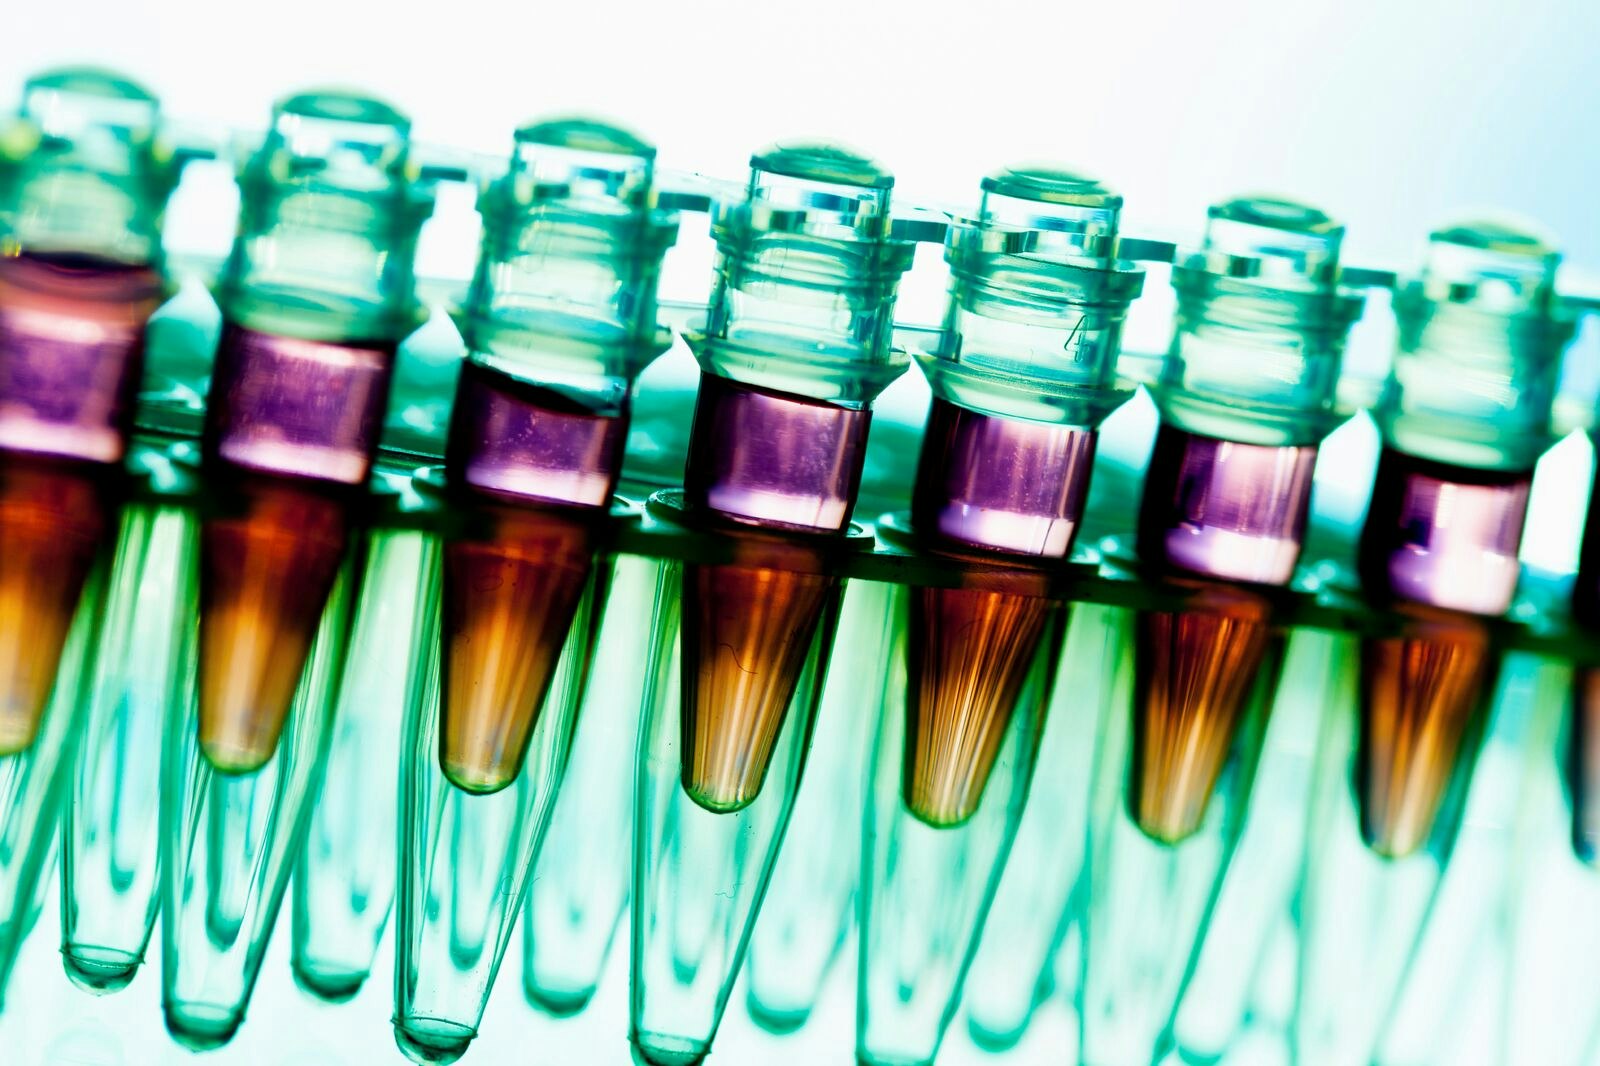 Laboratory Samples in Test Tubes